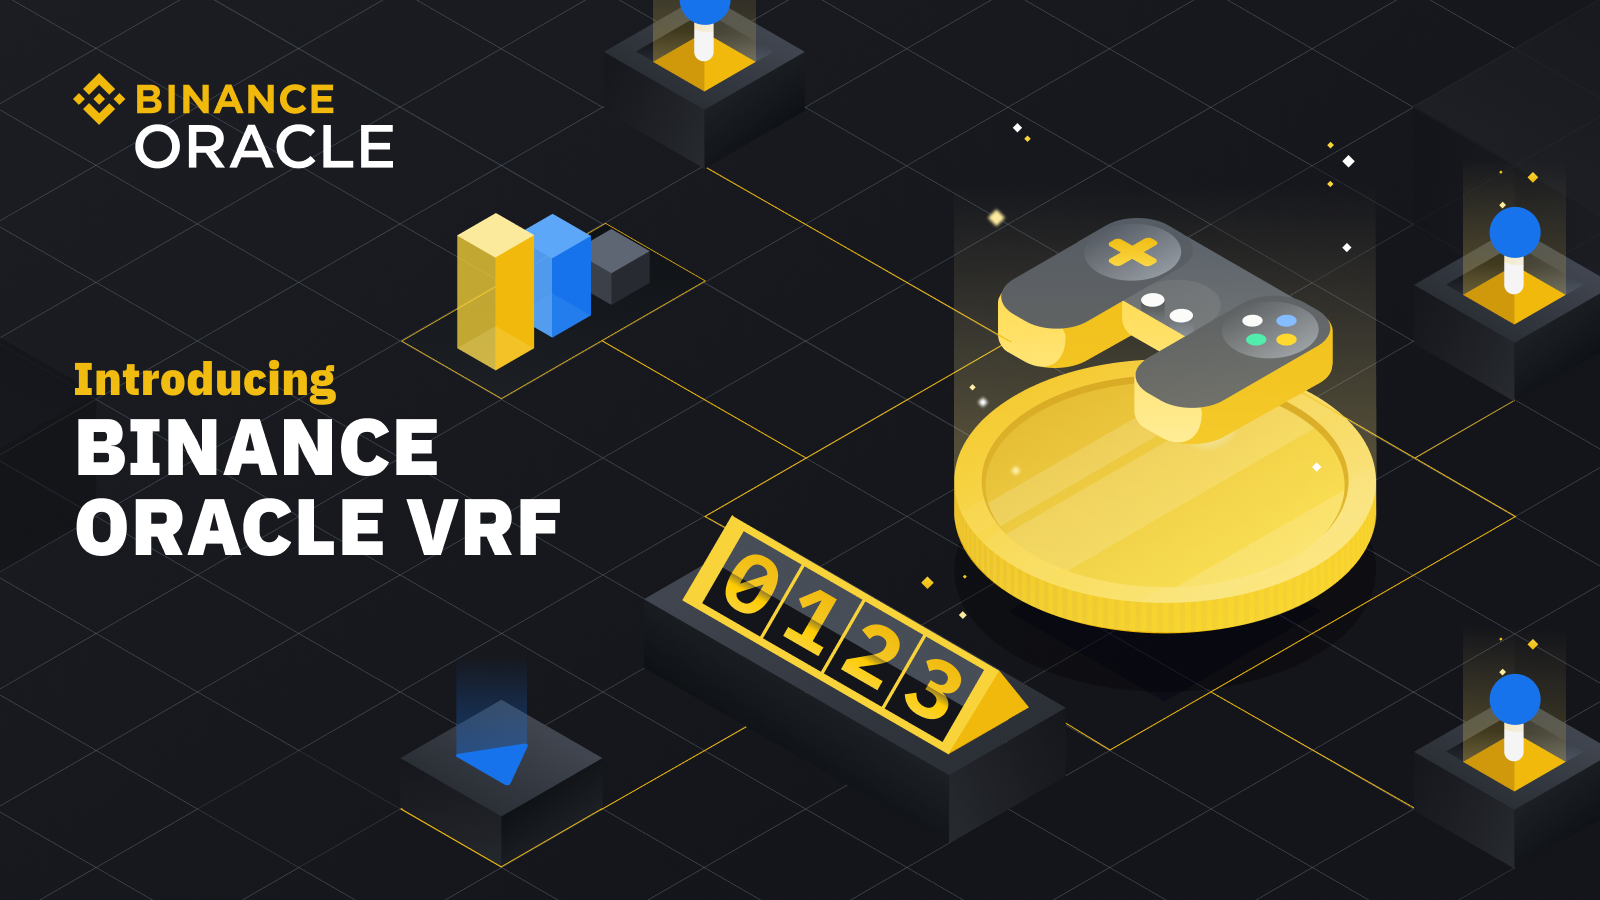 Introducing Binance Oracle VRF: The Next Generation of Verifiable Randomness